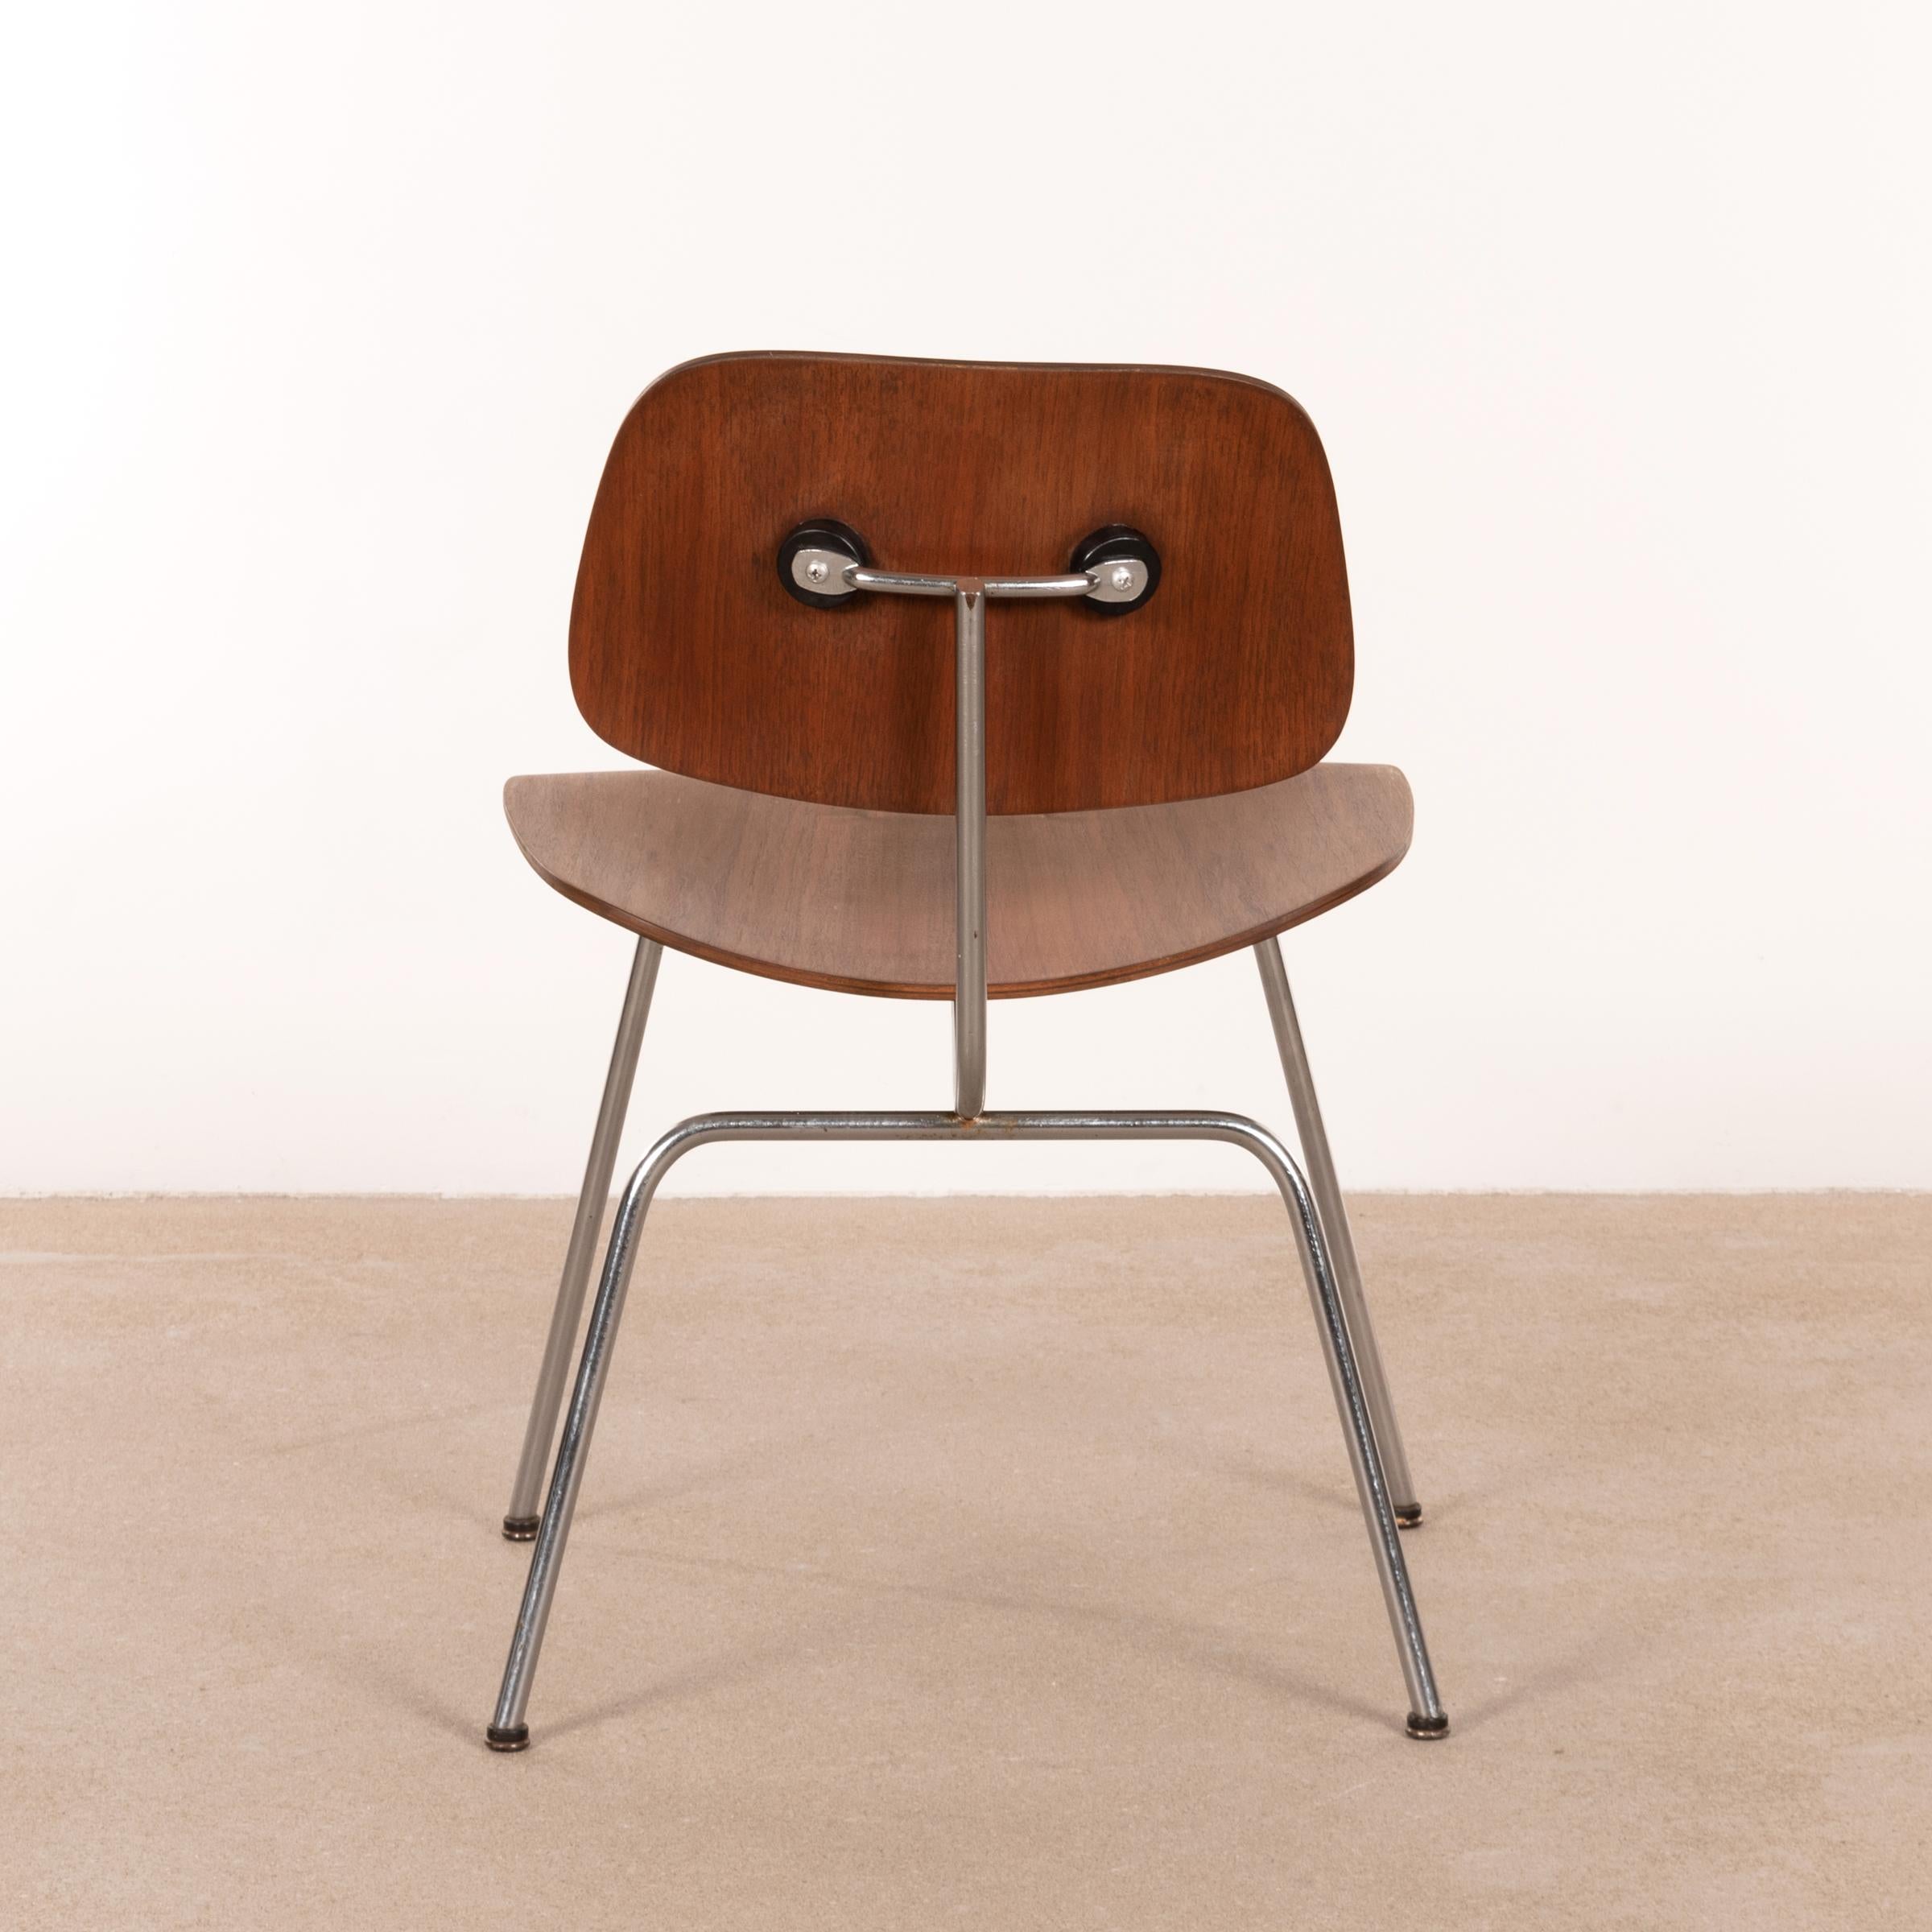 American Charles & Ray Eames Early DCM Walnut Side Chair by Herman Miller, USA